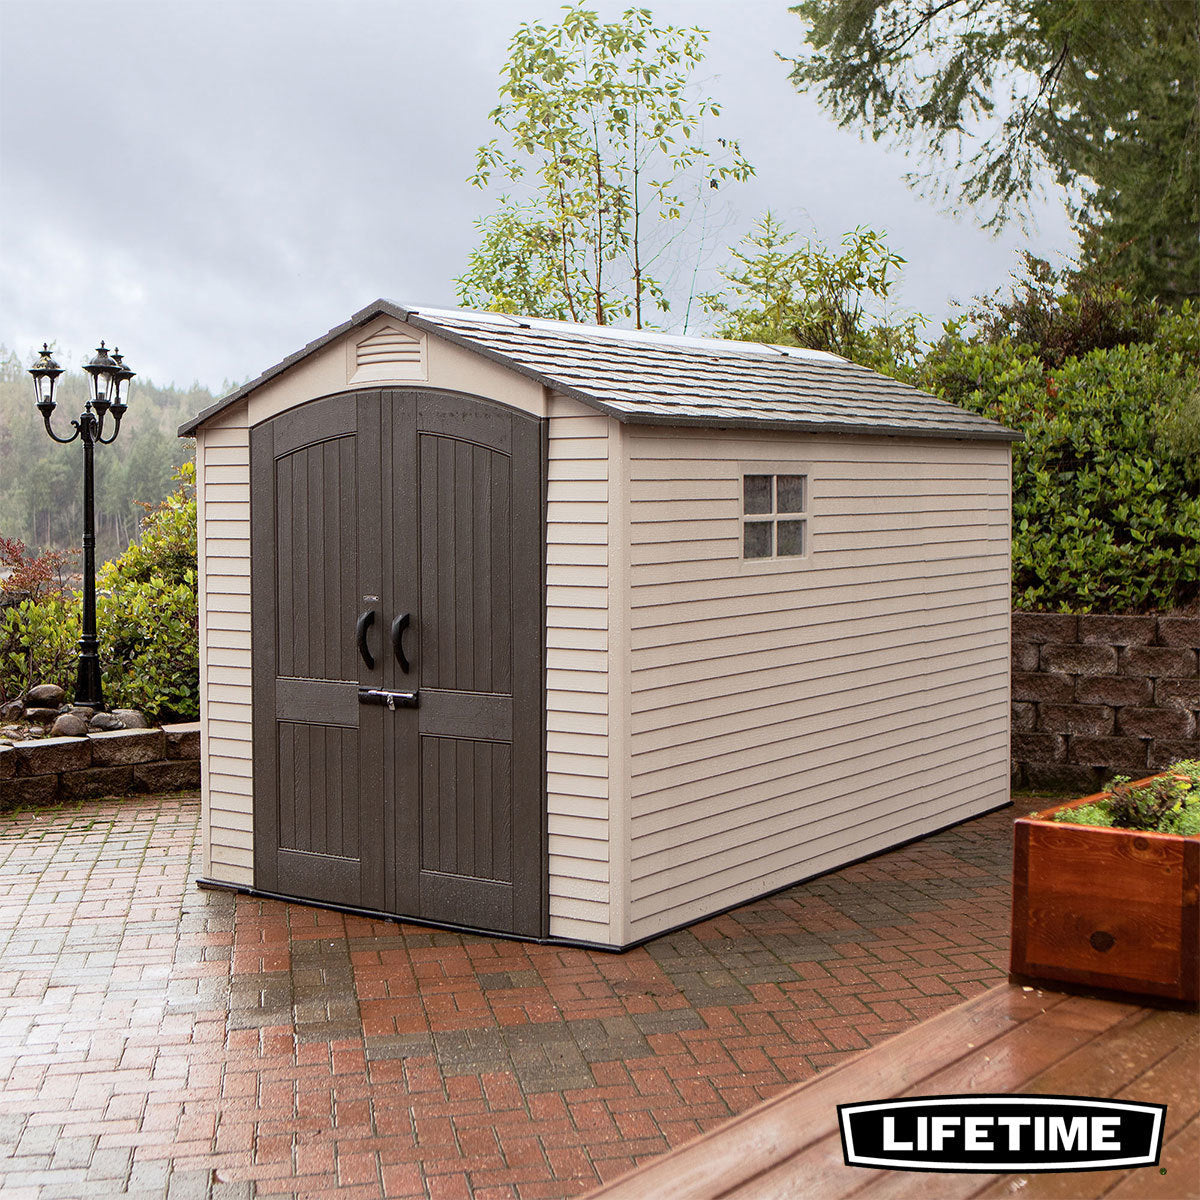 Lifetime 7ft x 12ft (2.1 x 3.6m) Outdoor Storage Shed - Model 60282